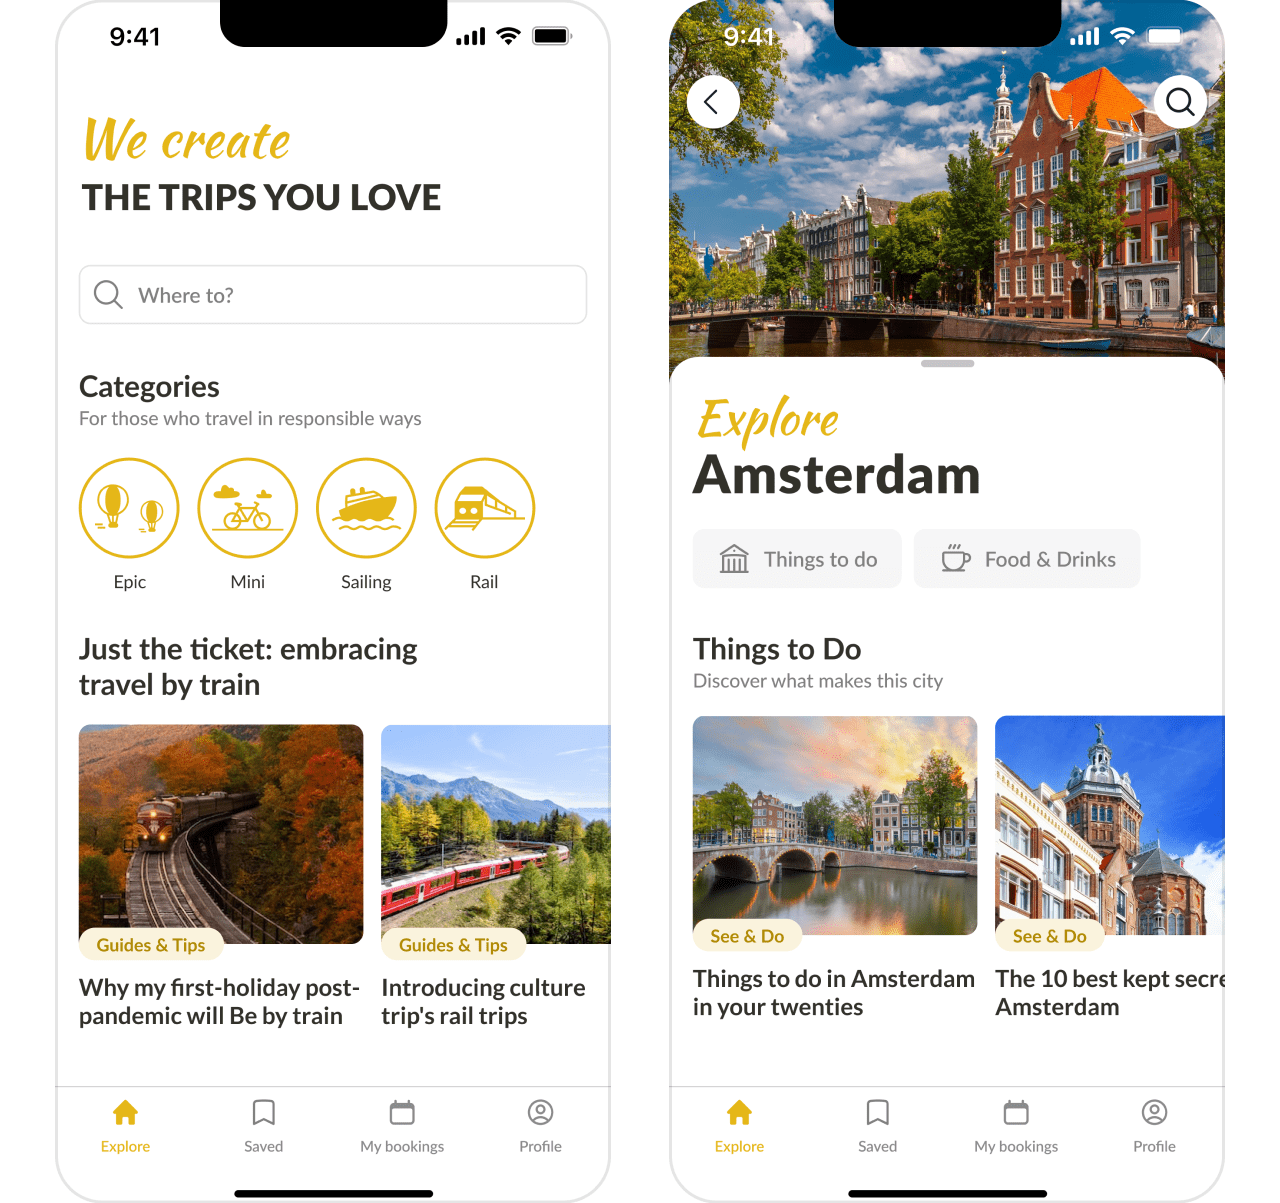 Tour guide apps